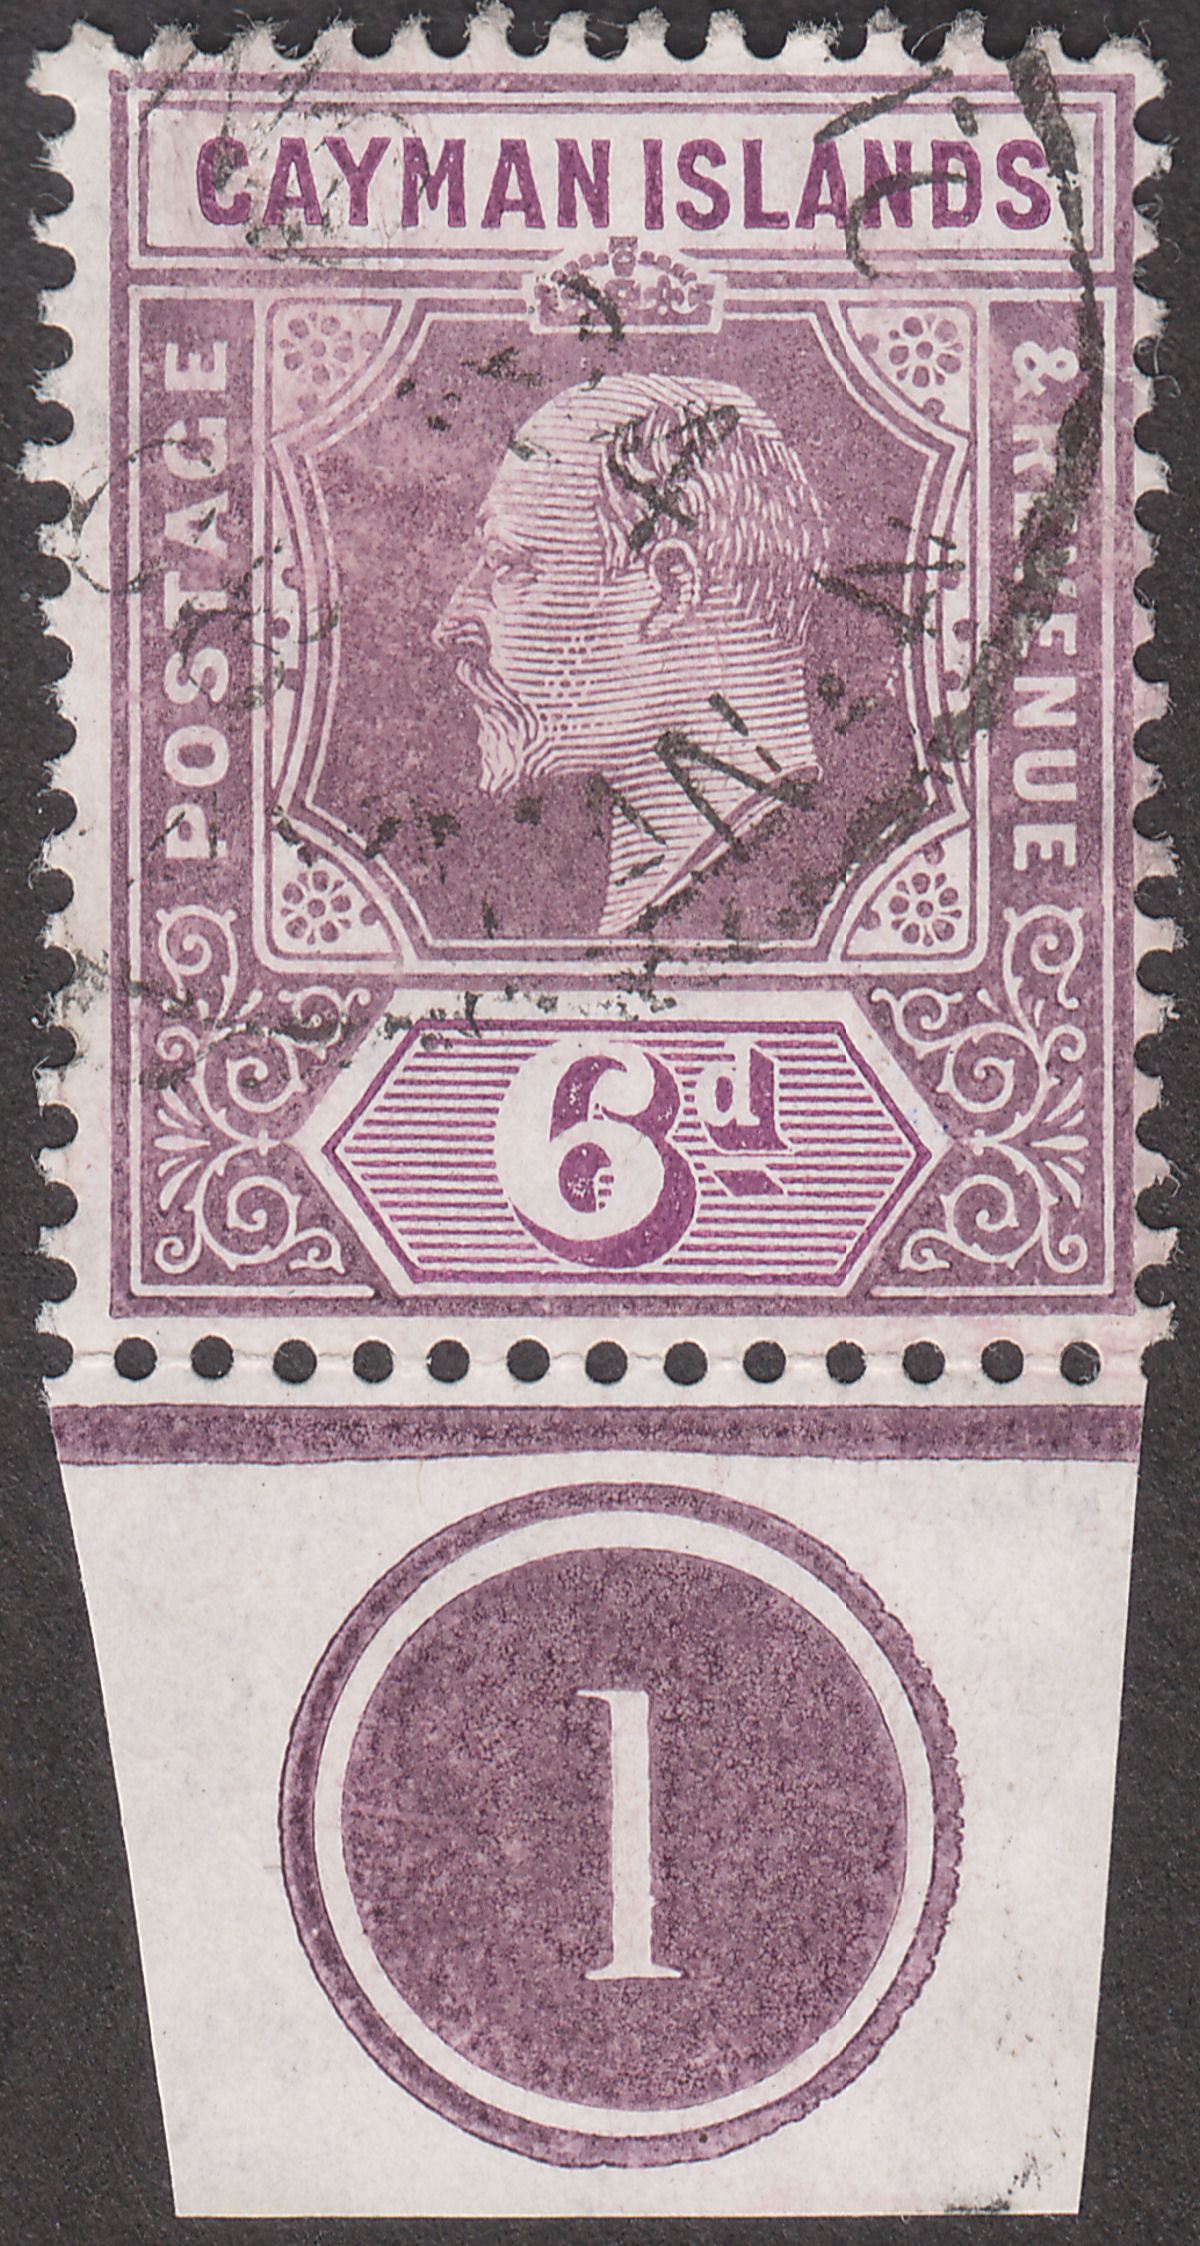 Cayman Islands 1908 KEVII 6d Dull Purple and Violet Purple Plate 1 Used SG30